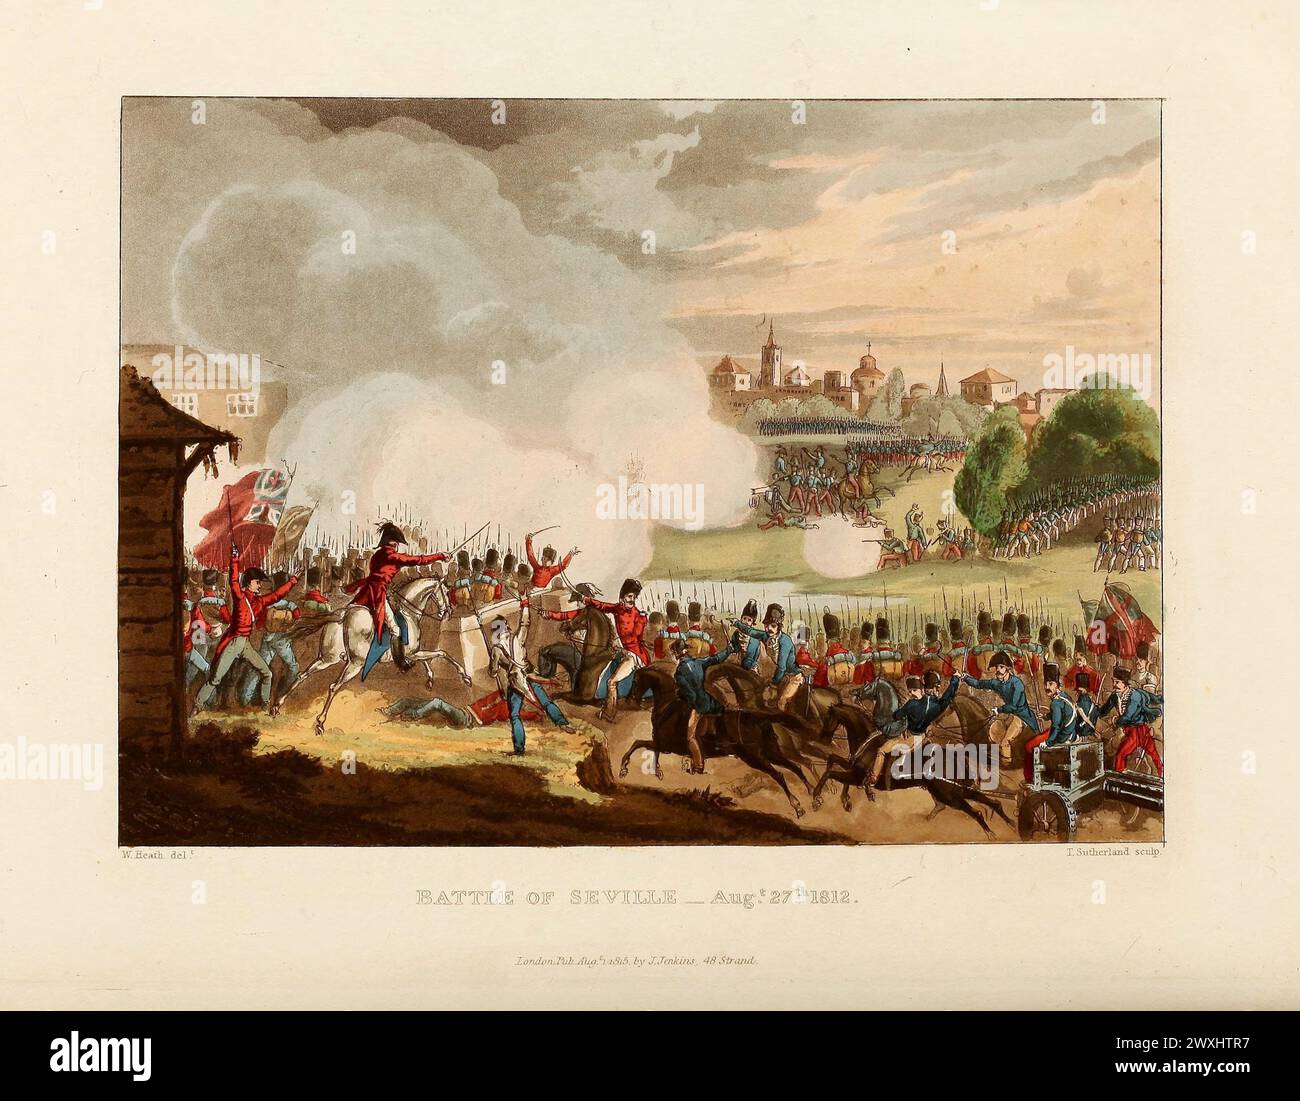 Battle of Seville, August 27, 1812. Vintage Coloured Aquatint, published by James Jenkins, 1815,  from  The martial achievements of Great Britain and her allies : from 1799 to 1815. Stock Photo